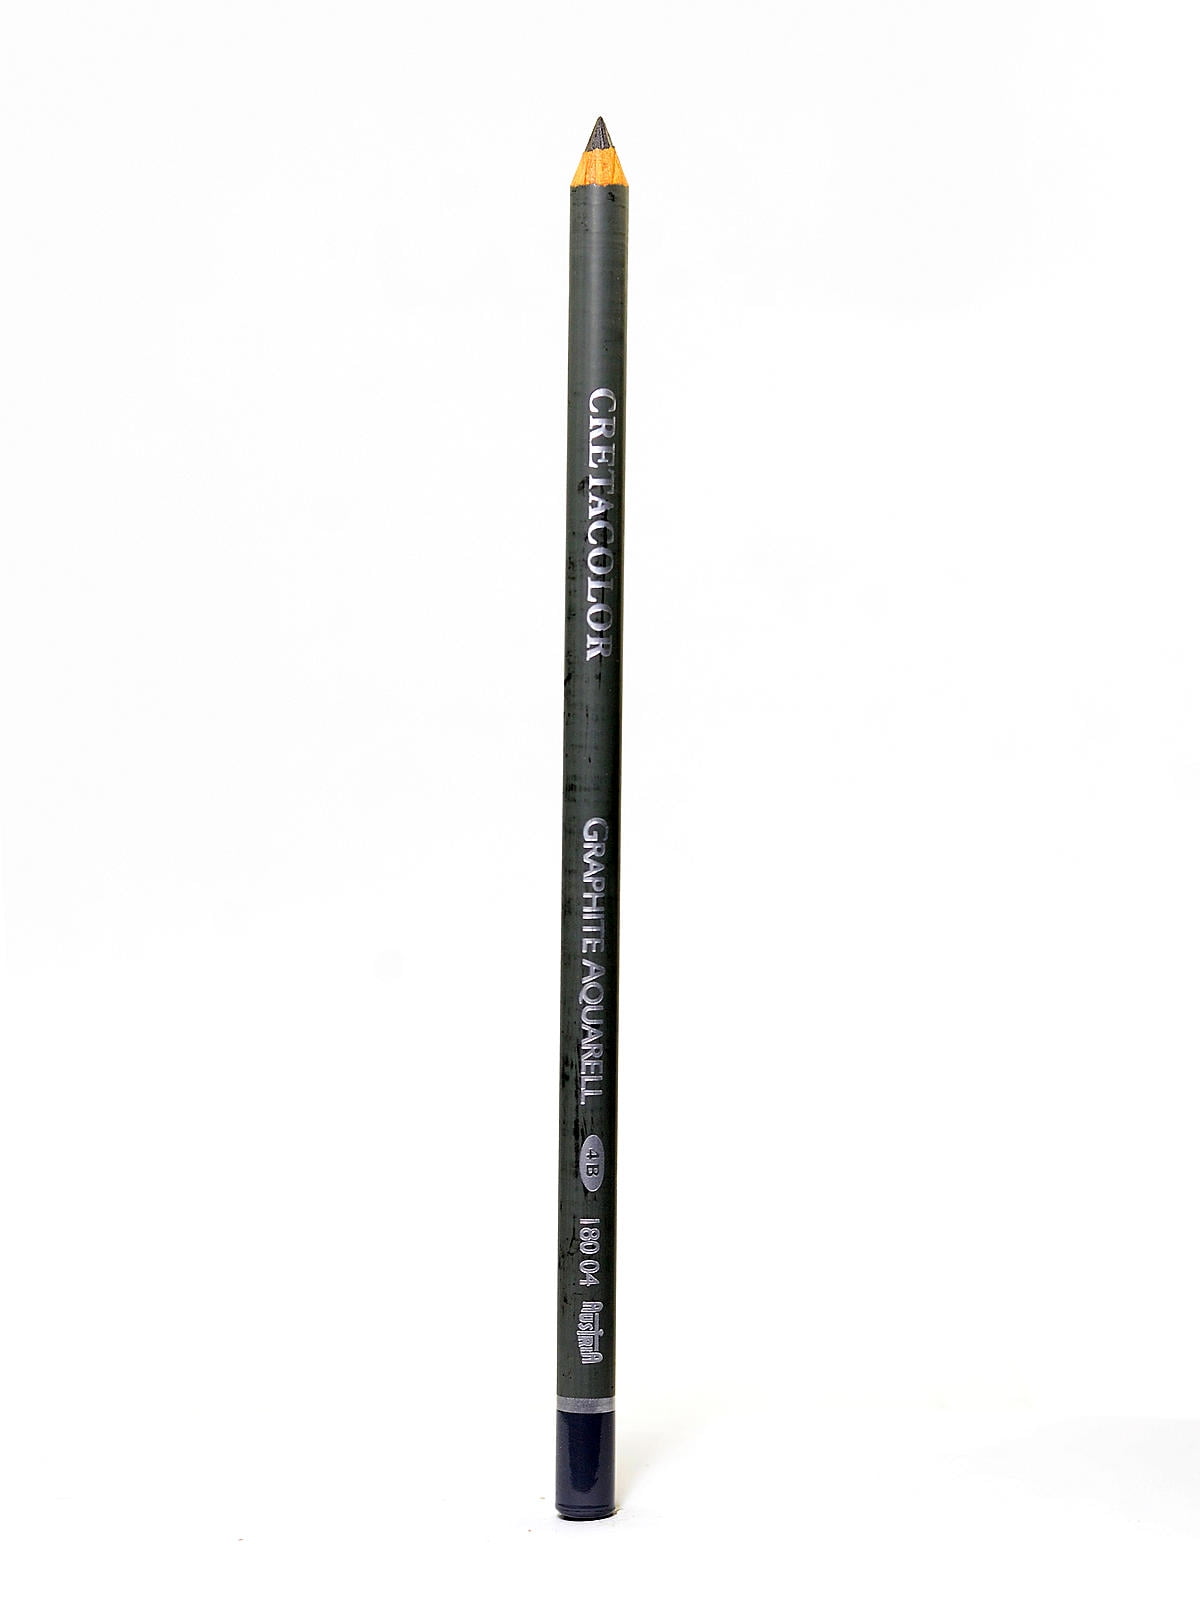 WaterSoluble Graphite Pencils 4B (pack of 12)